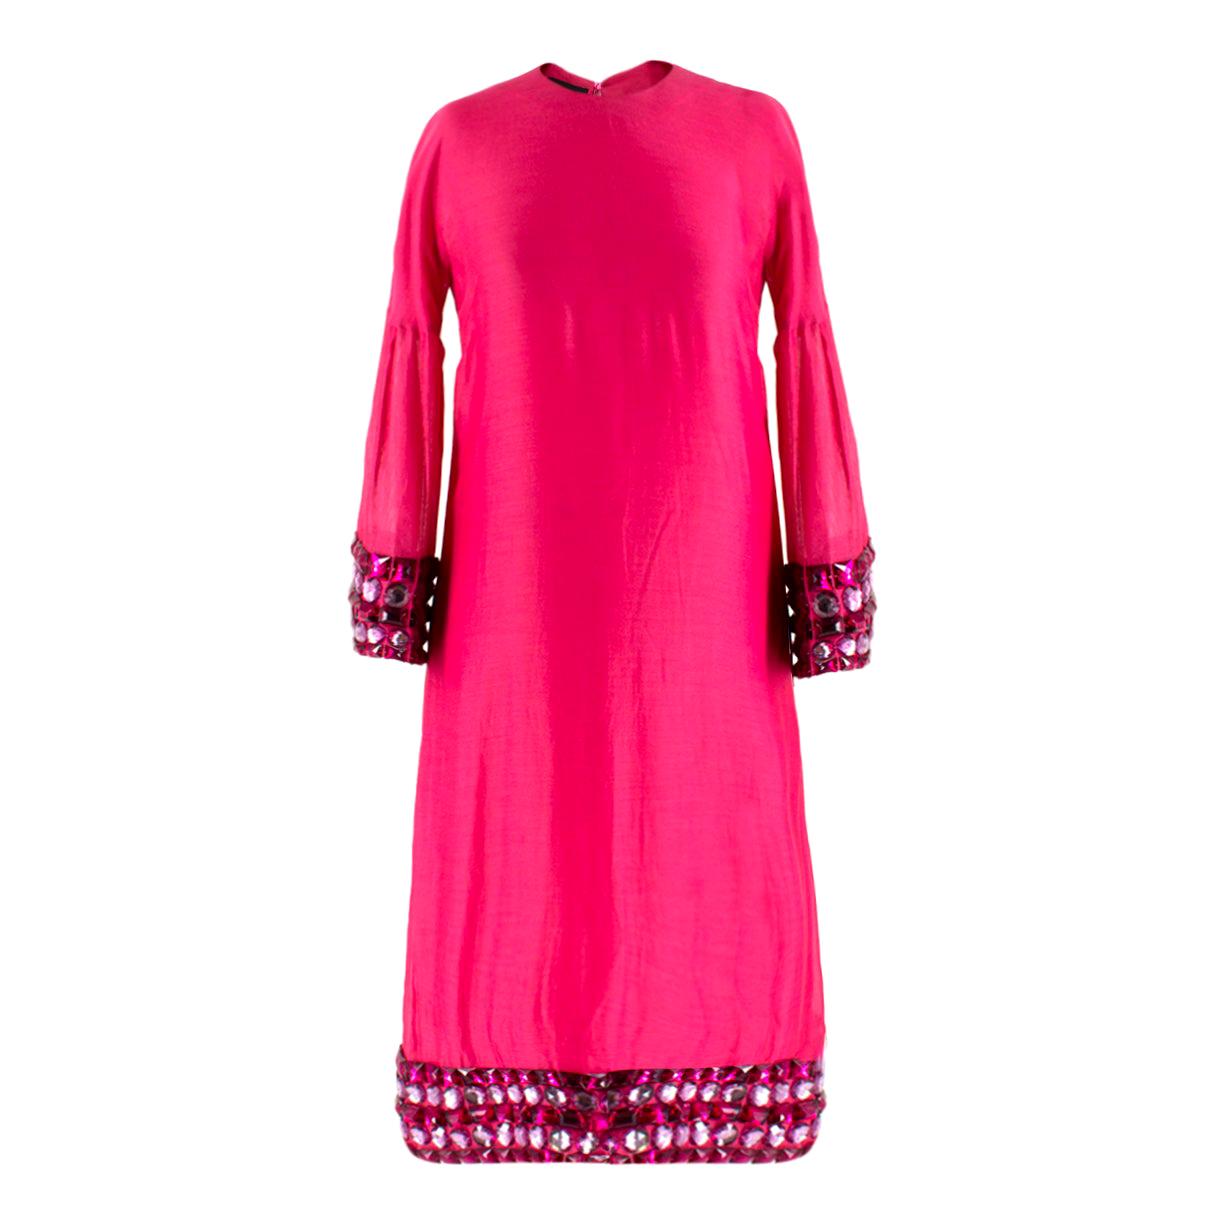 Burberry Pink Jewelled Midi Dress estimated SIZE XS For Sale